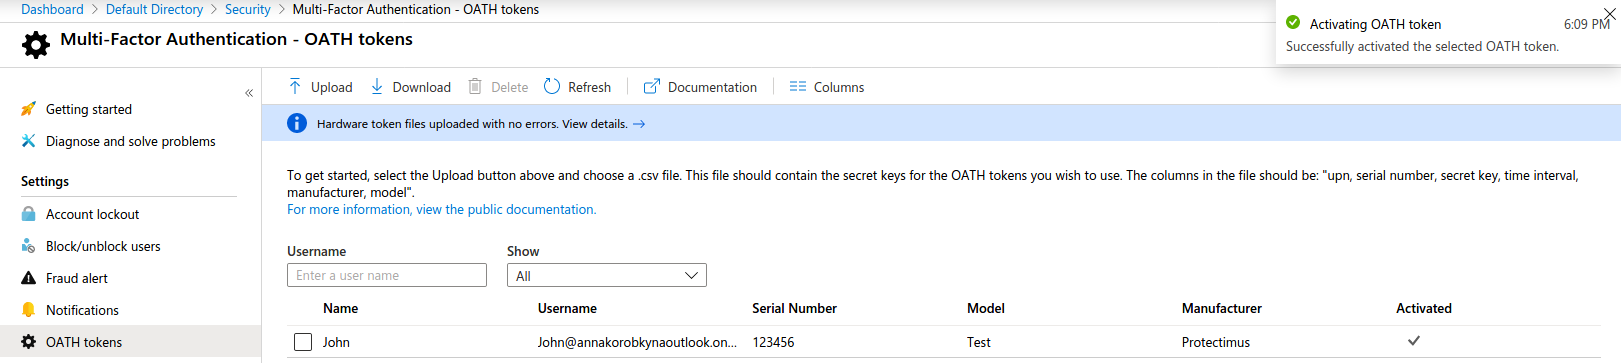 OATH tokens for Azure MFA setup - activated